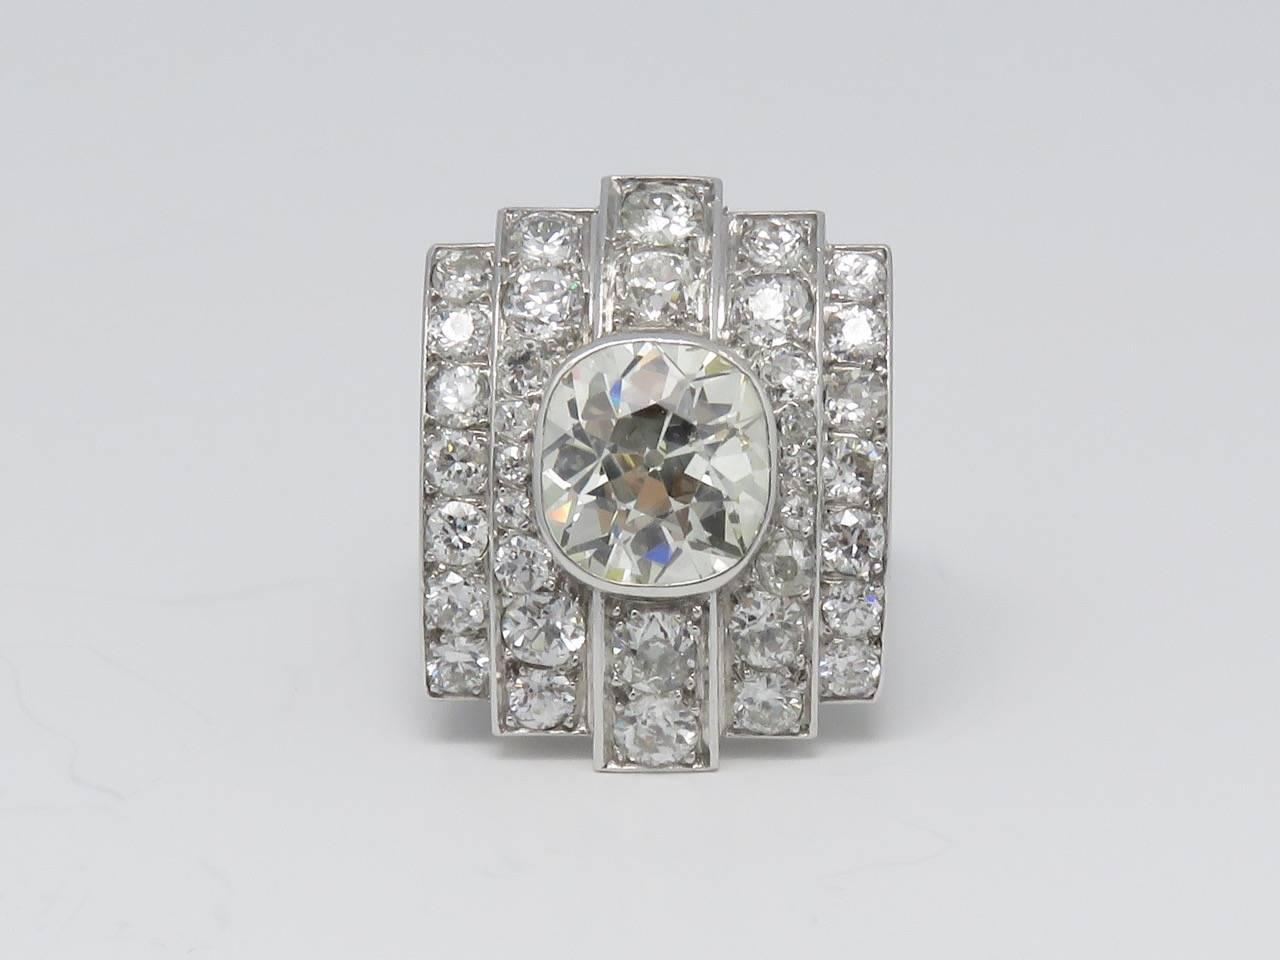 This beautiful platinum Art Deco ring with 1 main  set antique cushion cut diamond weighing approximately 5.00 carats and with approximately 4.00 carats of old european cut diamonds.
Ring Size: 6 1/4      ( T53 )
Measurements: 
Width: 10.24 inches